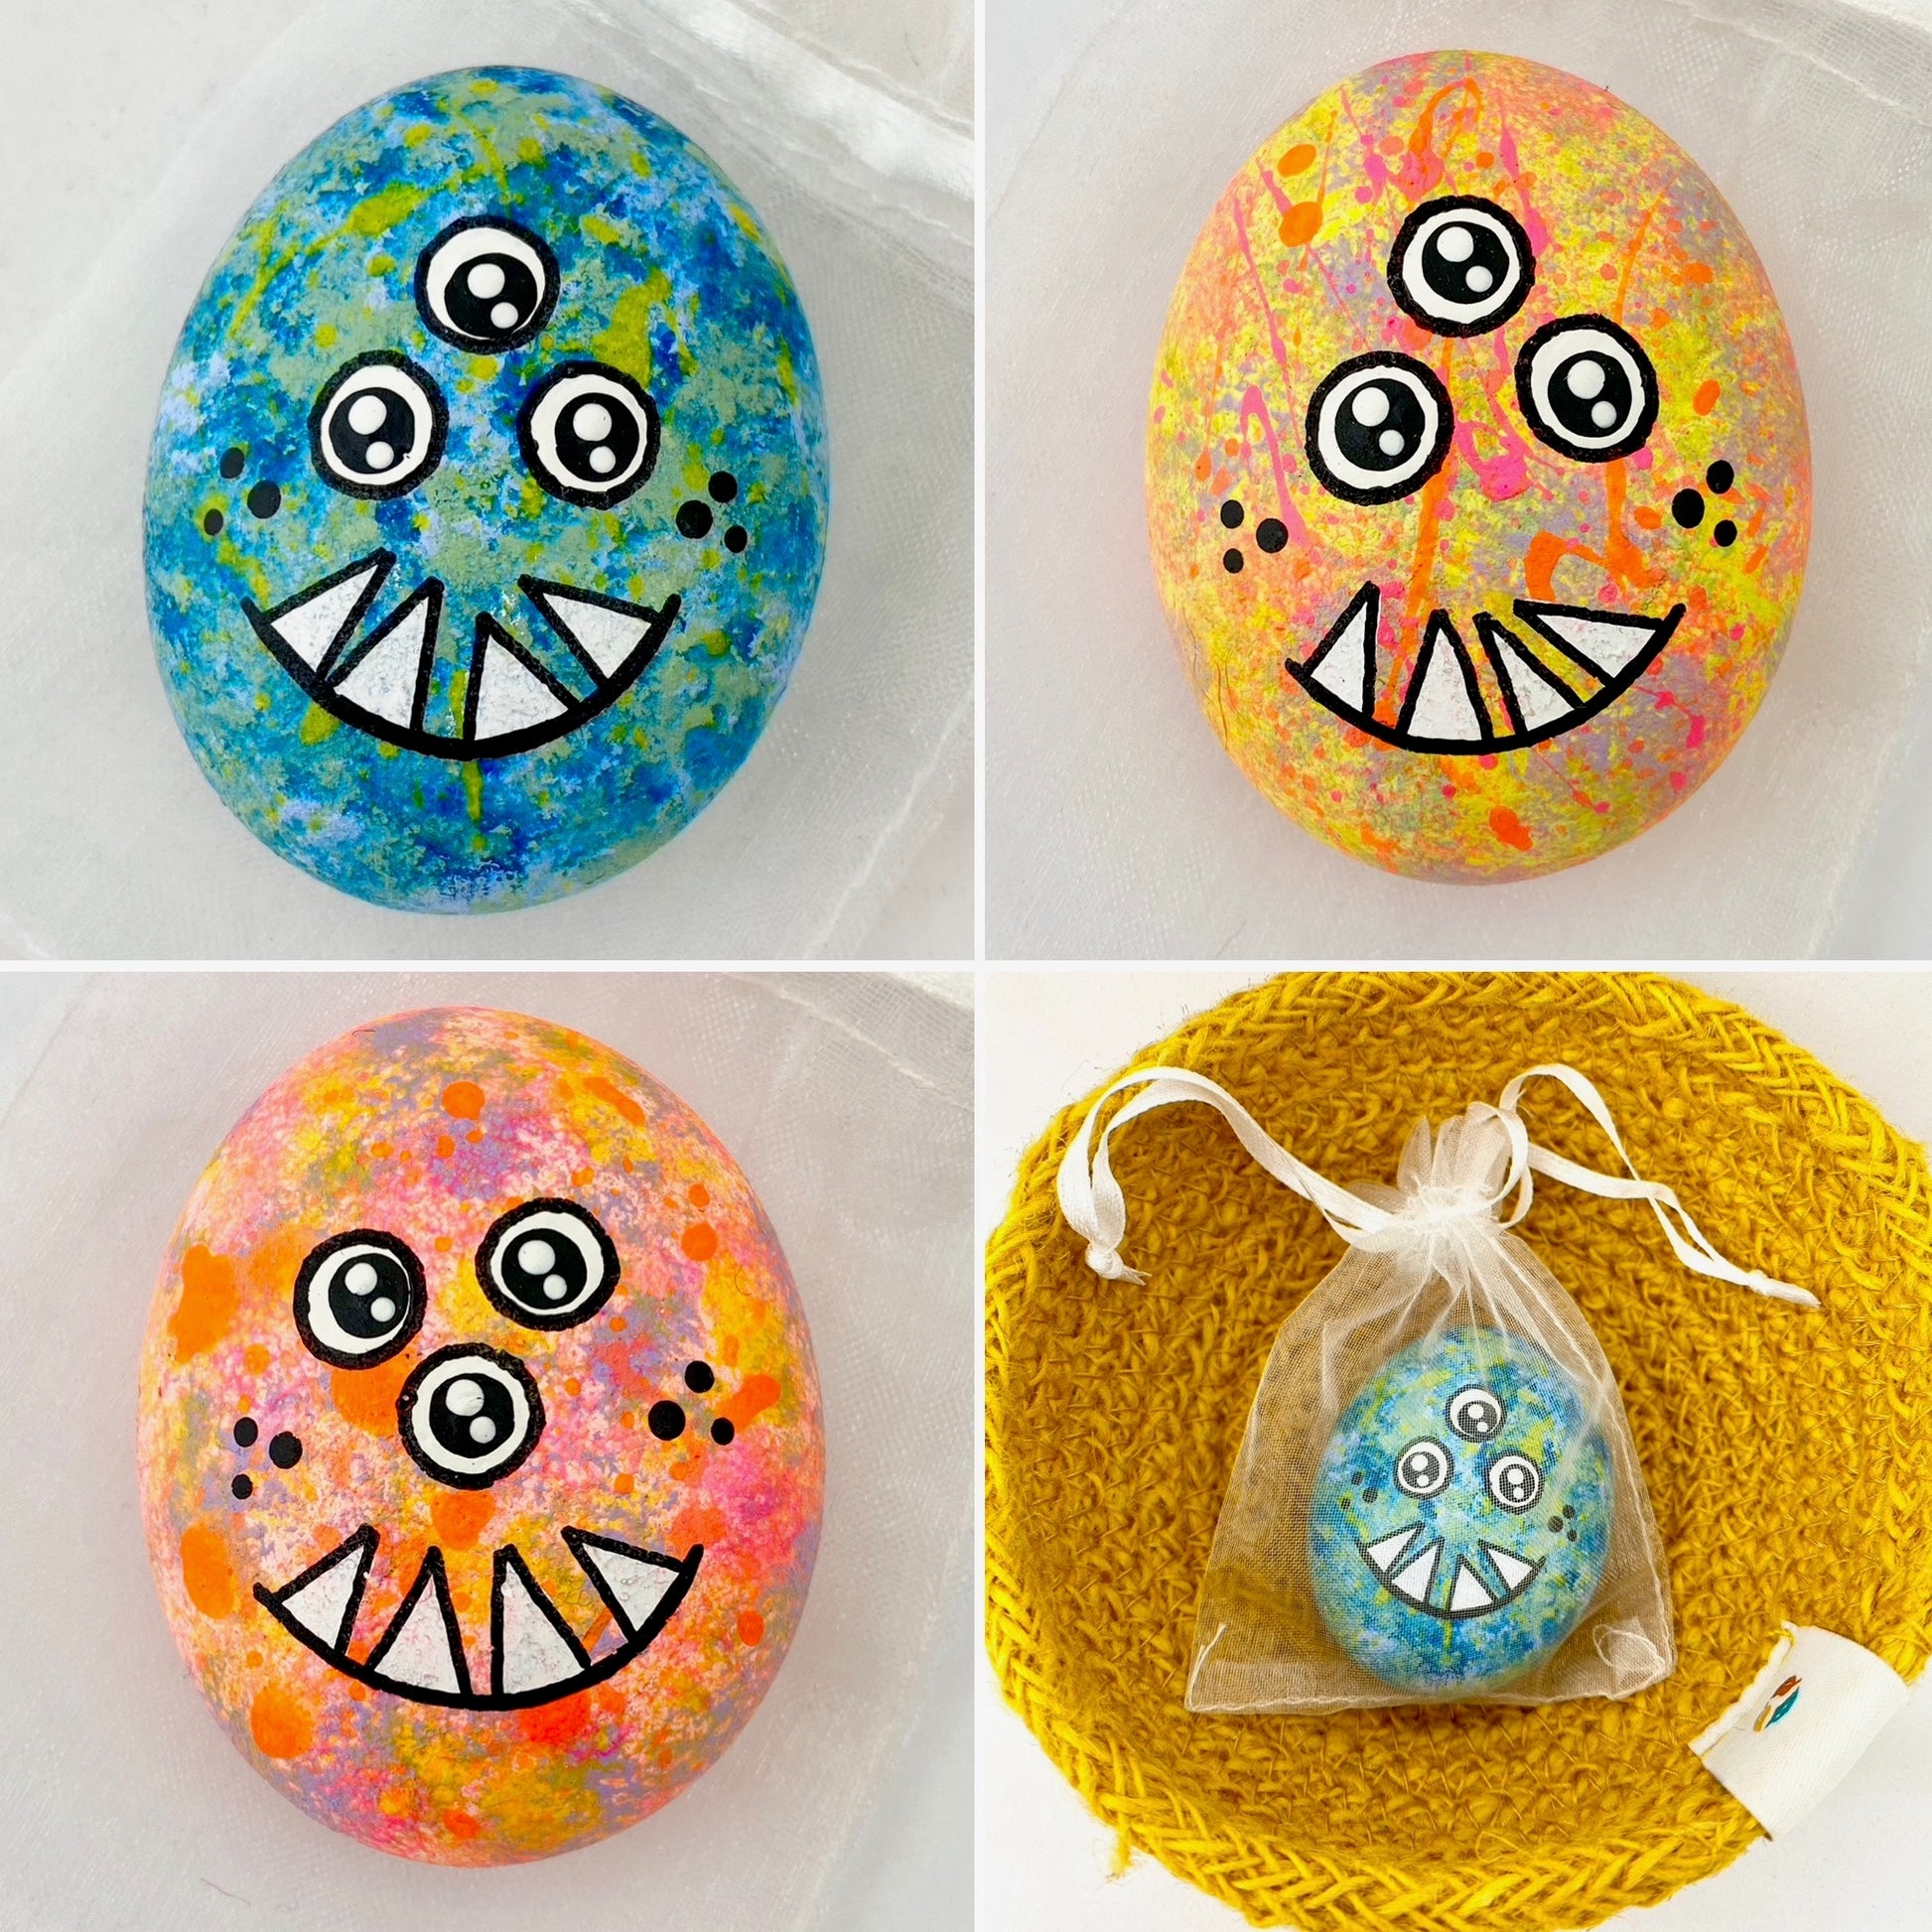 Hand painted 3 eyed monster pebbles called Plarp in 4 different colour ways